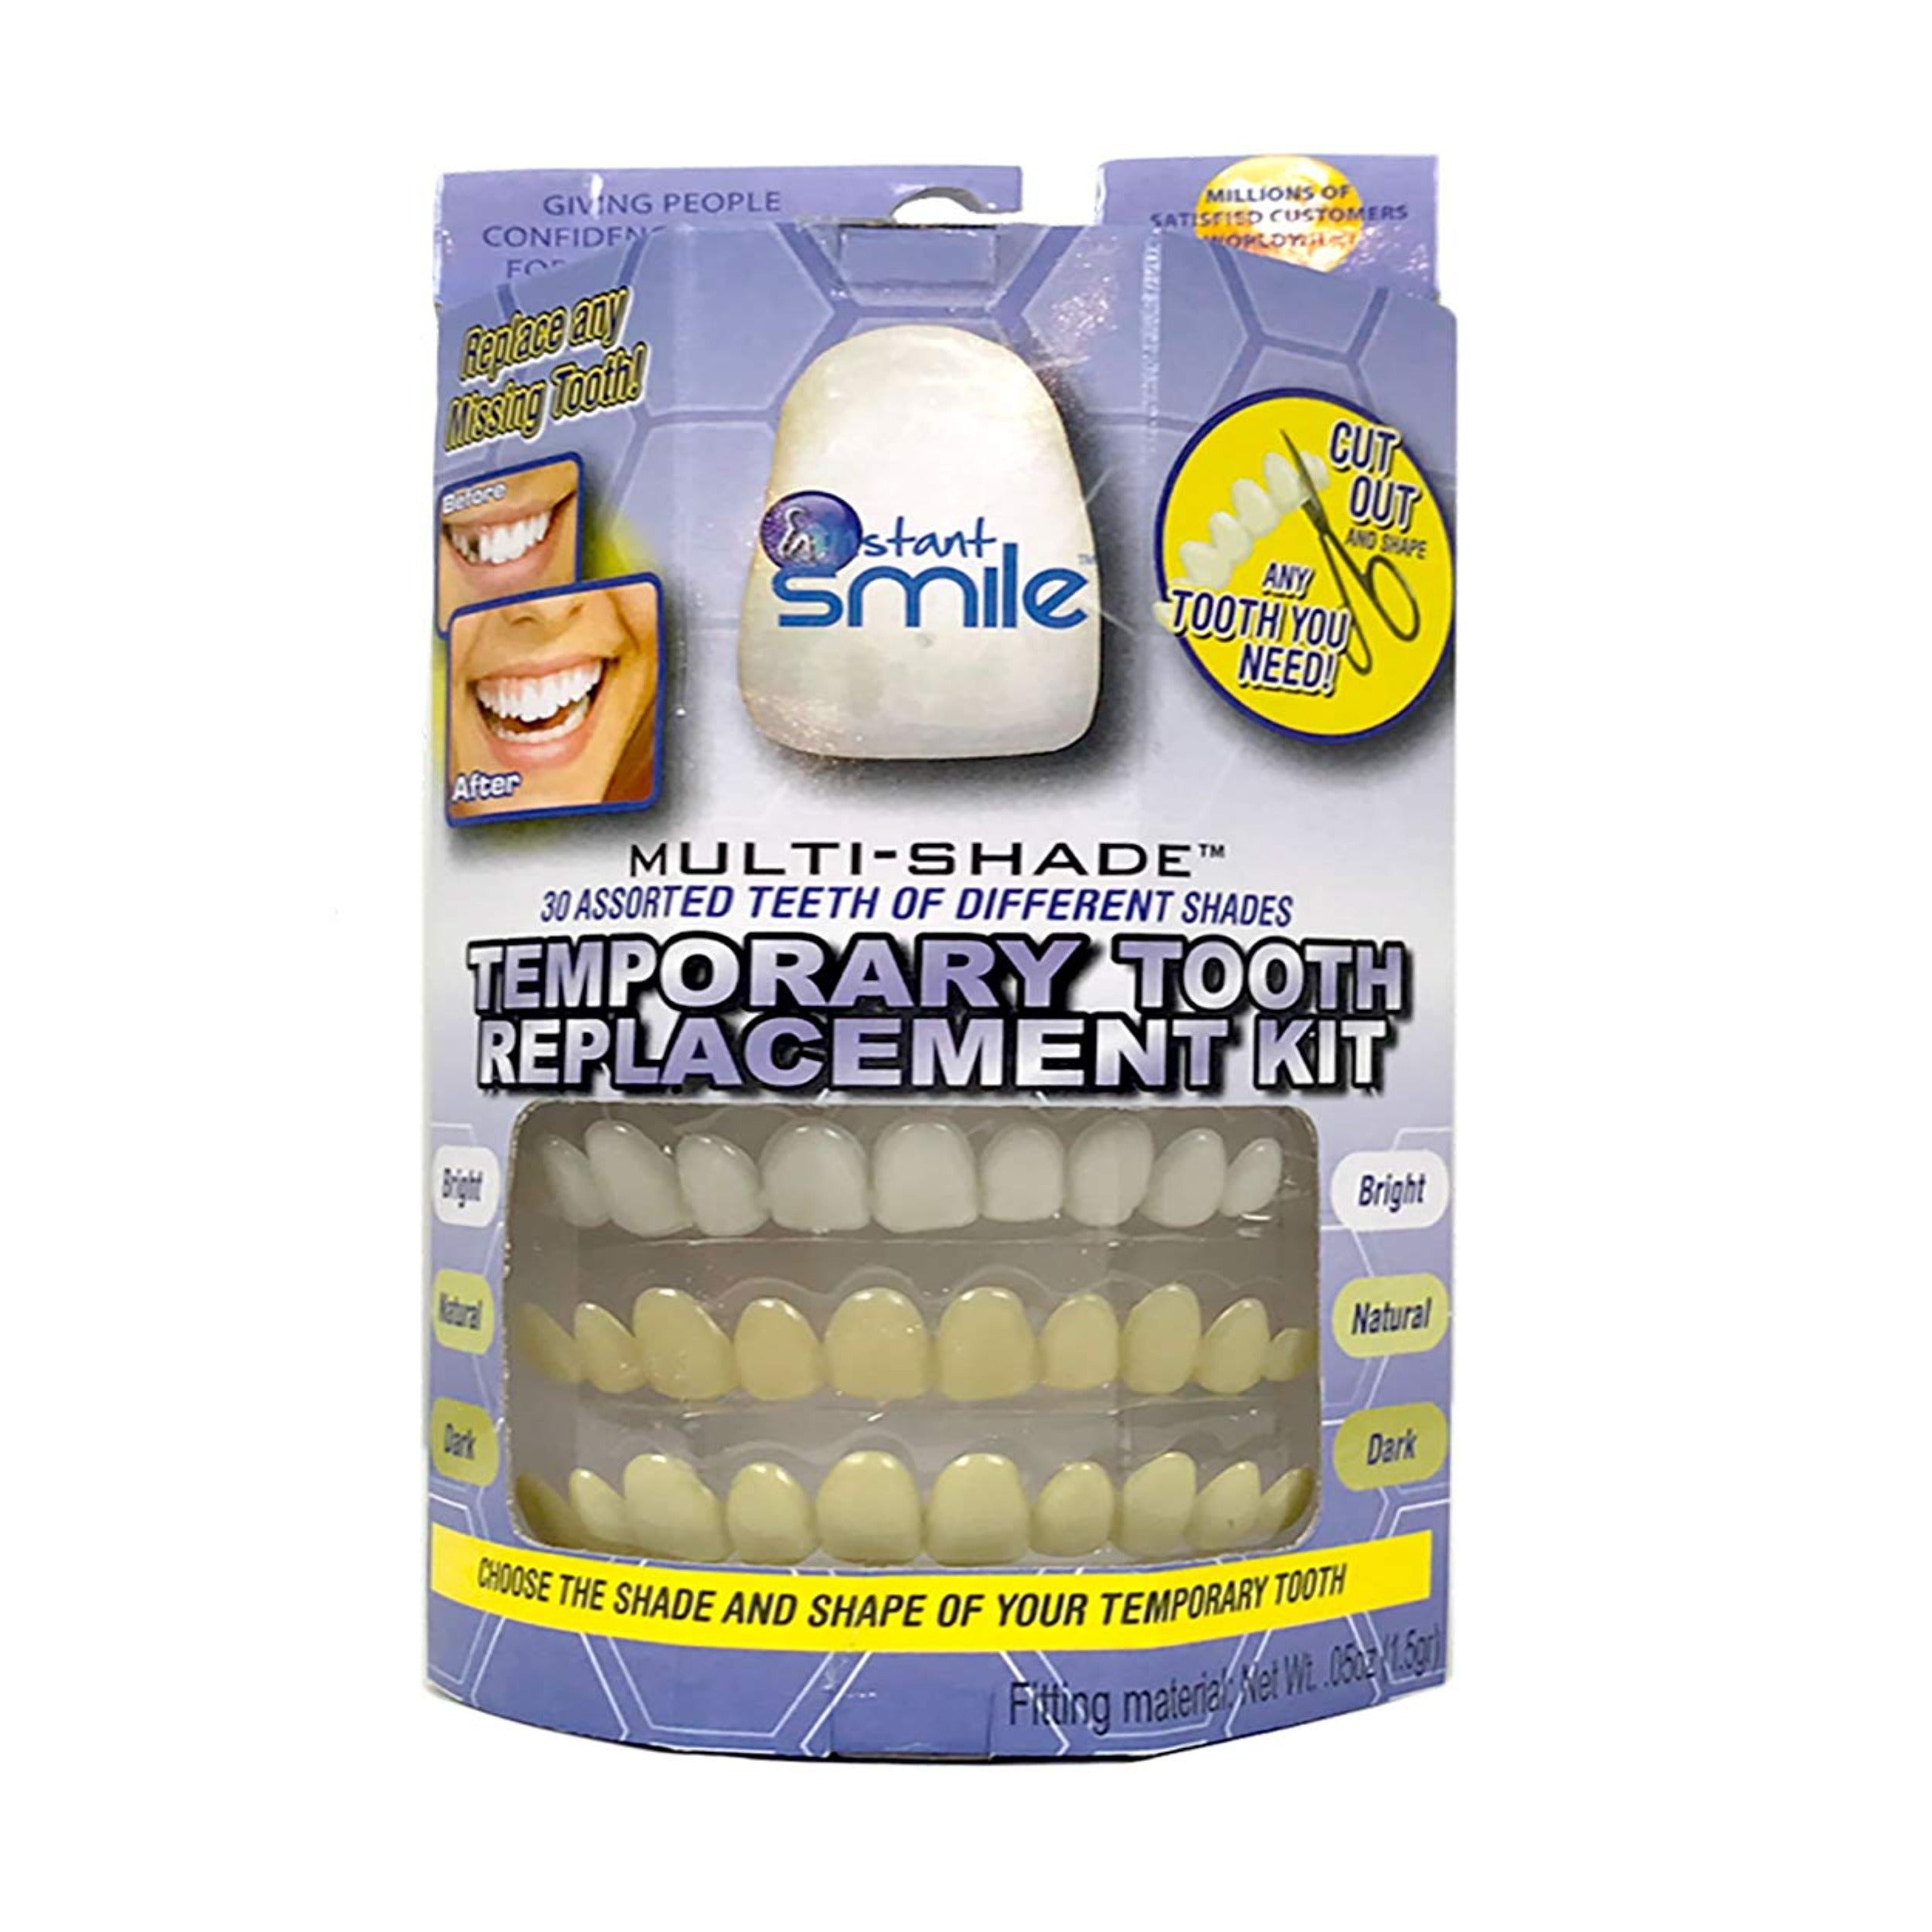 Wholesale Instant Smile Multi Shade Patented Temporary Tooth